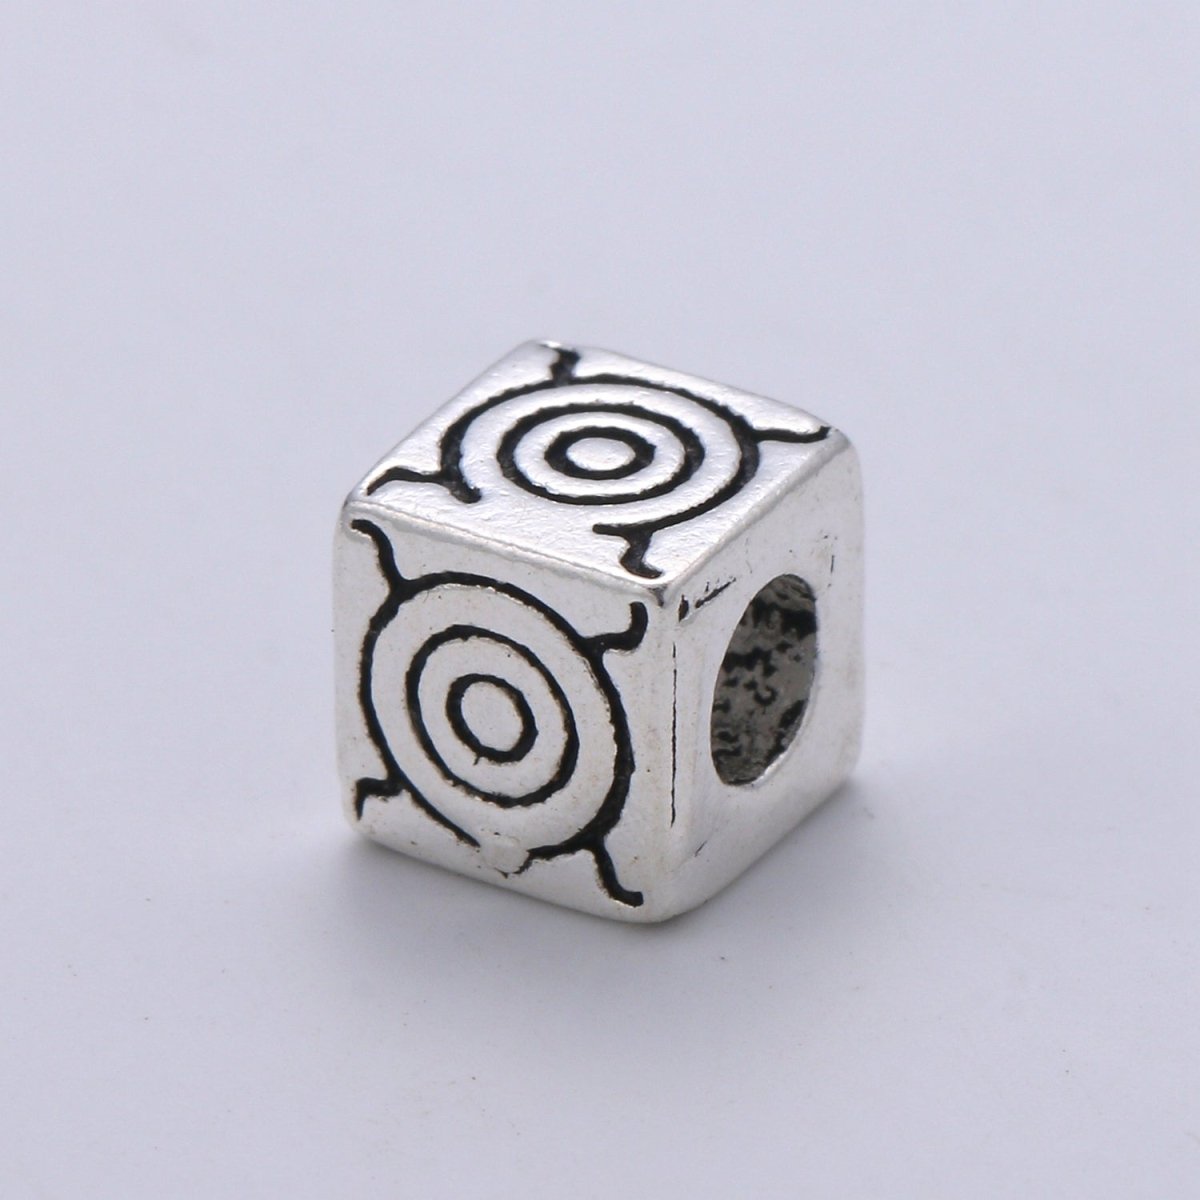 925 Sterling Silver Bali Style Bead, Cube Bead Silver Circle Pattern Bead for Bracelet making Supply, Bracelet Bead Spacer SL-216 - DLUXCA